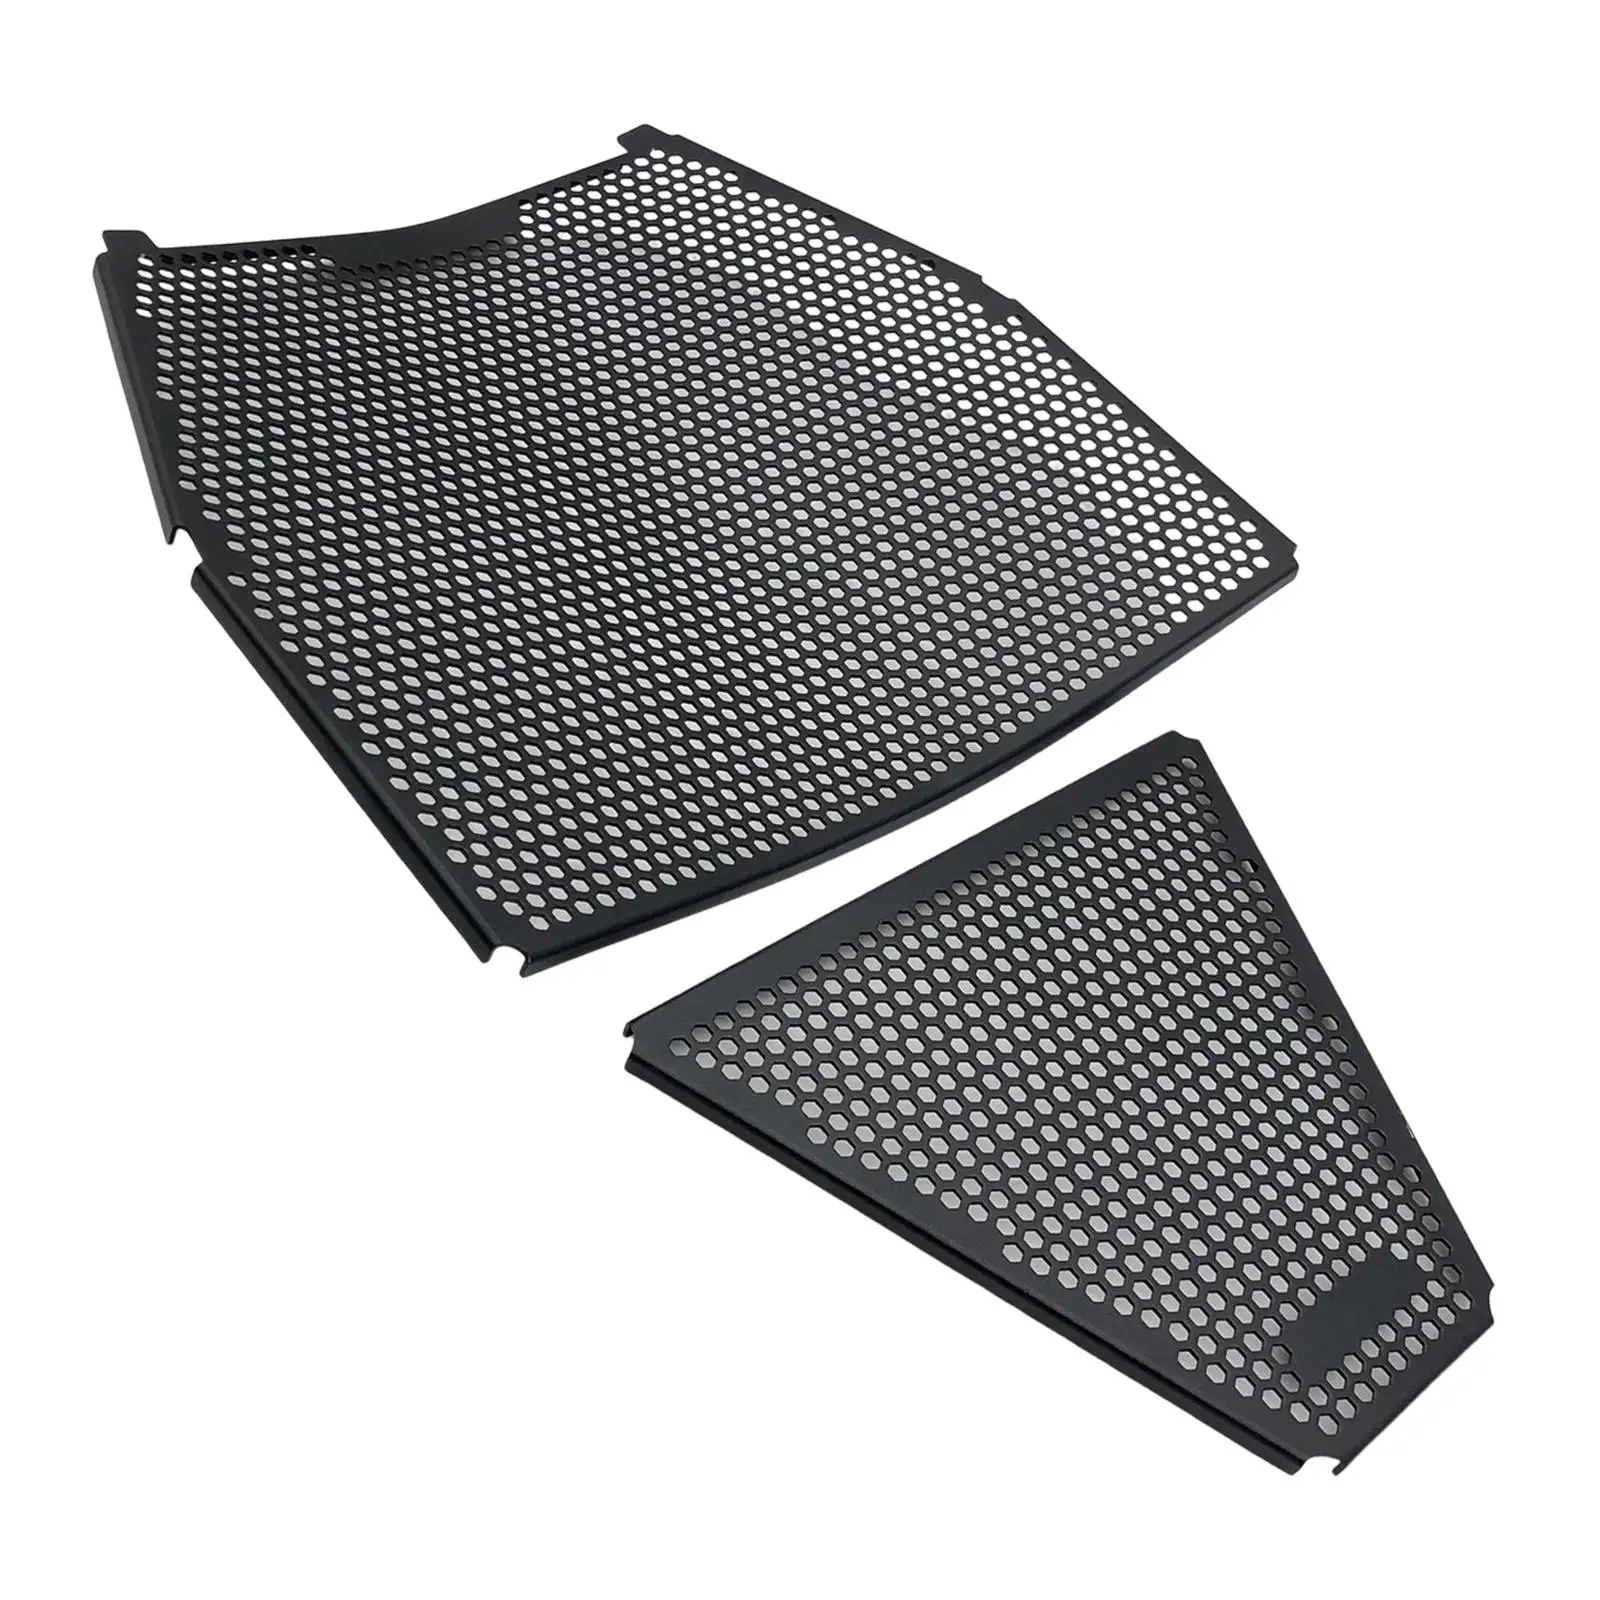 Motorcycle Radiator Grille Guard /Protective Cover for Ducati Panigle V4